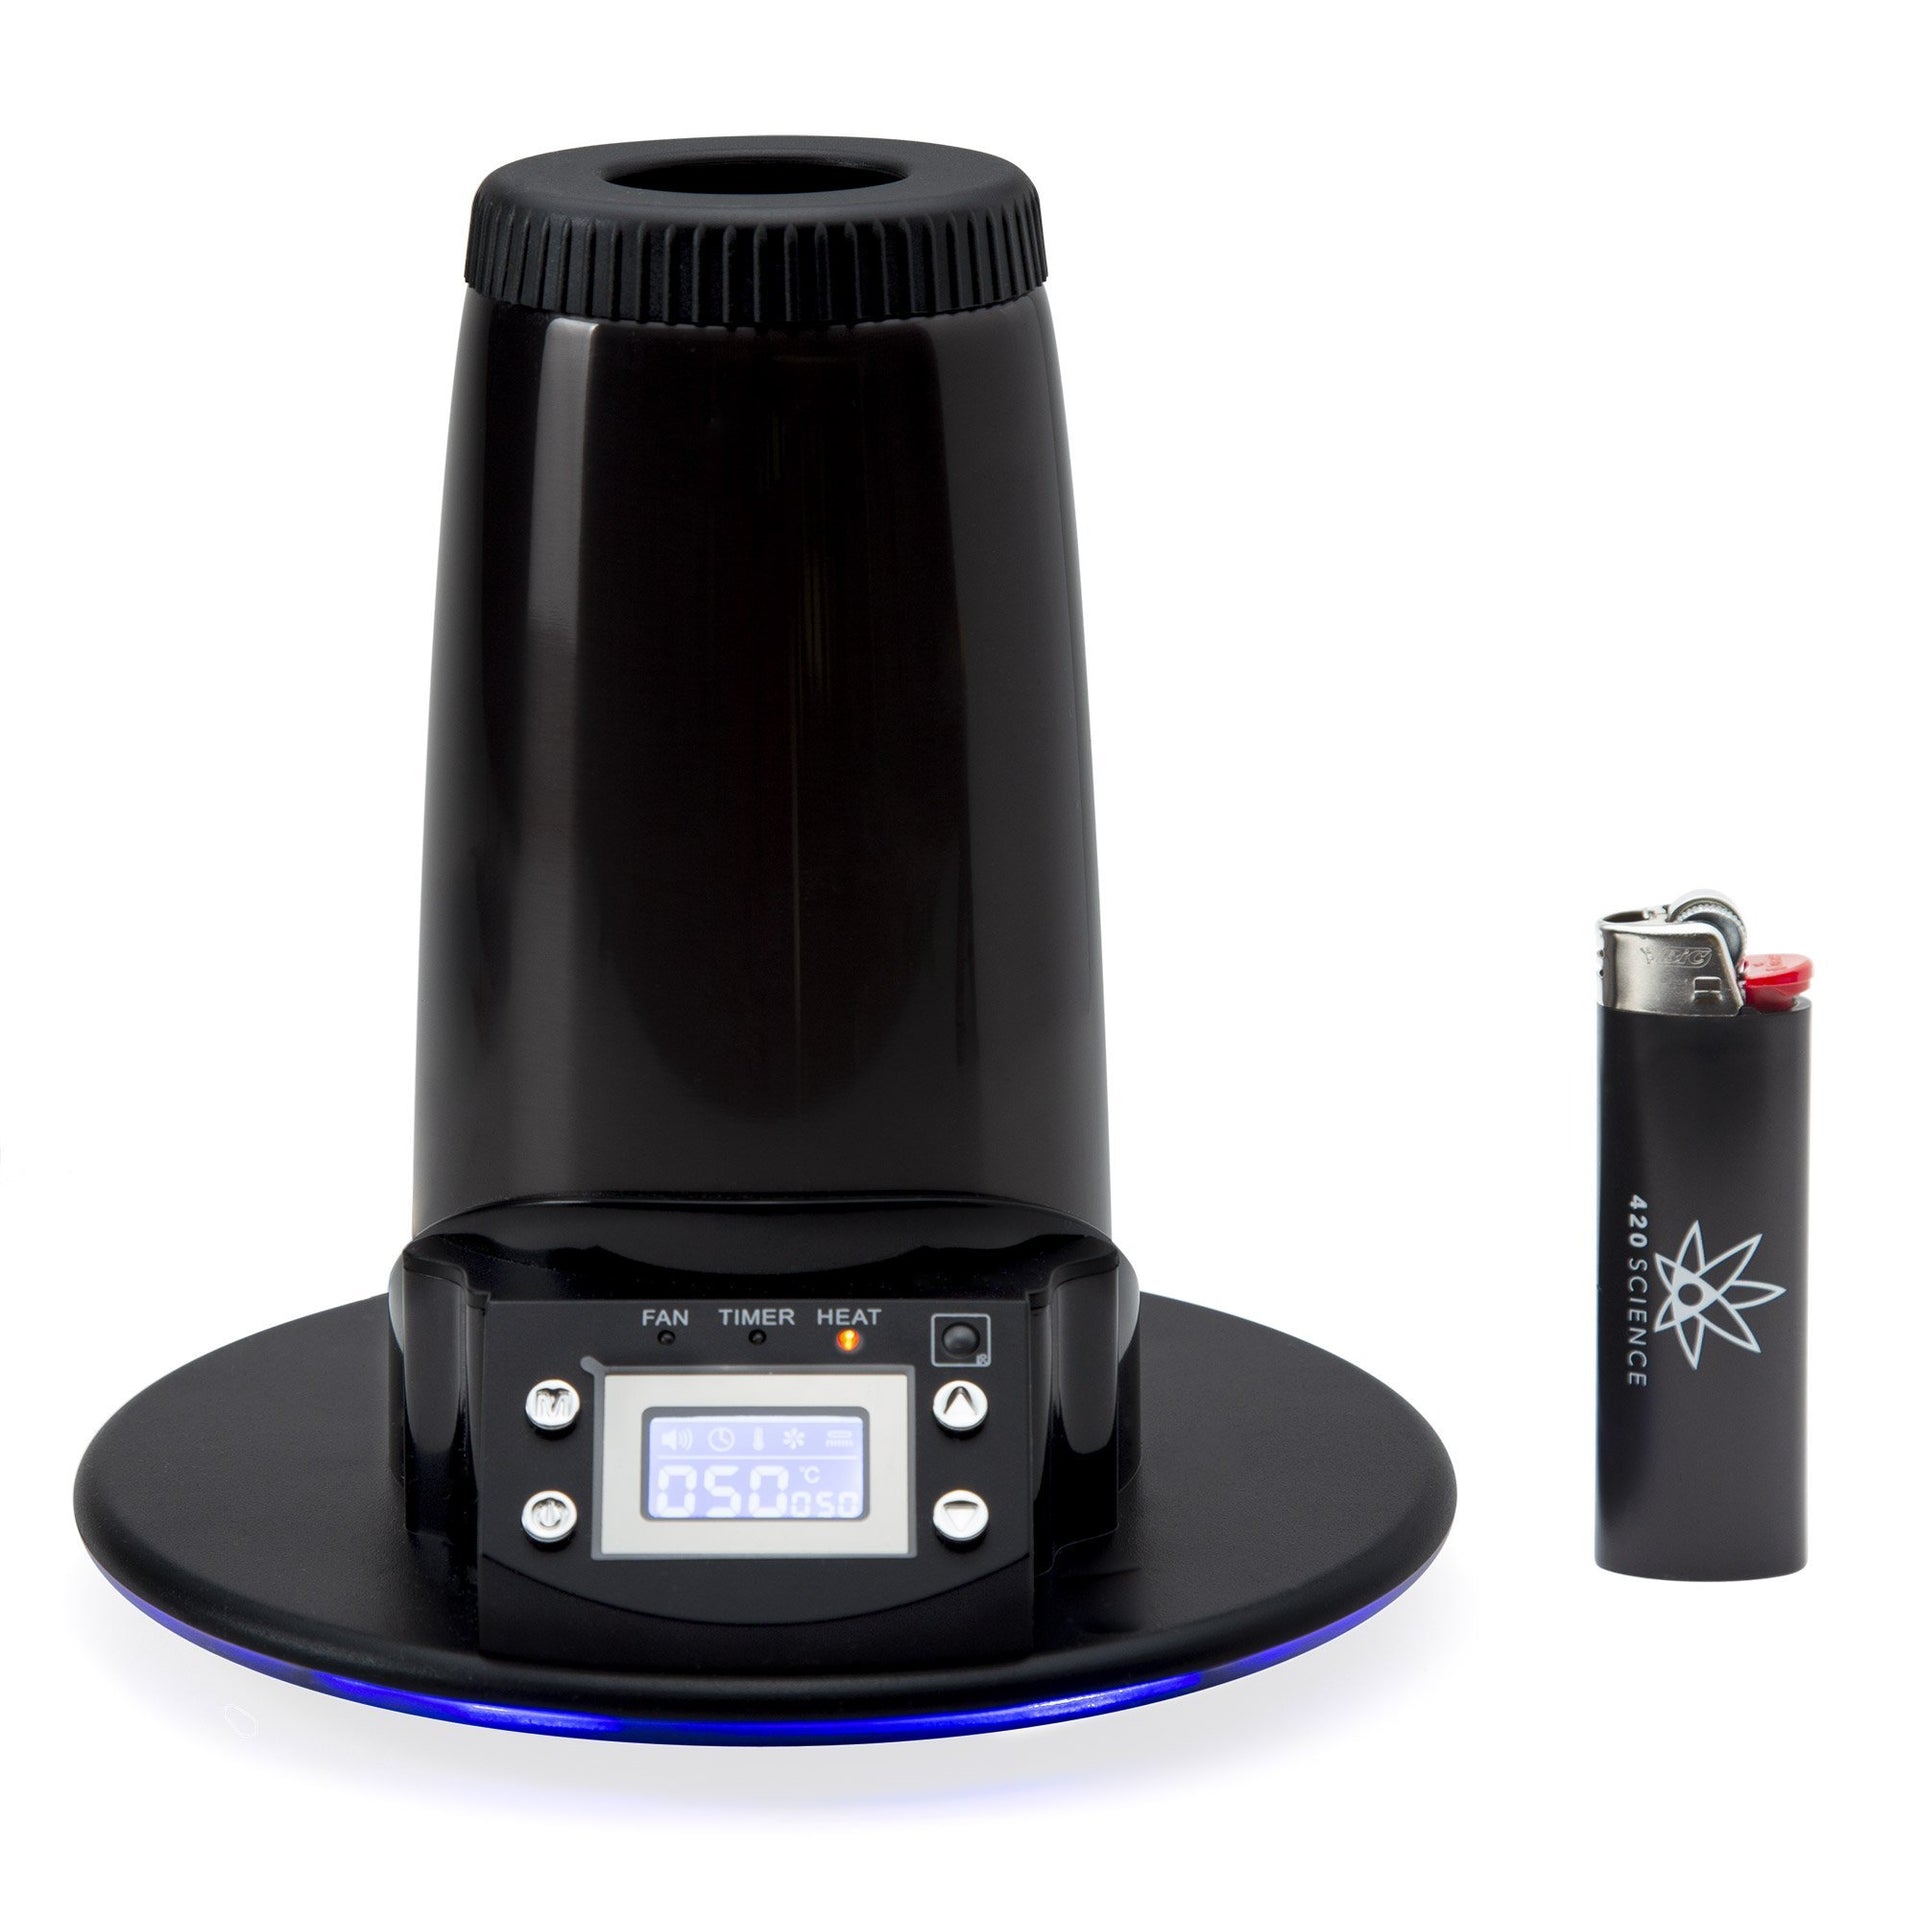 Arizer Extreme Q Remote Control Desktop Vaporizer - 420 Science - The most trusted online smoke shop.